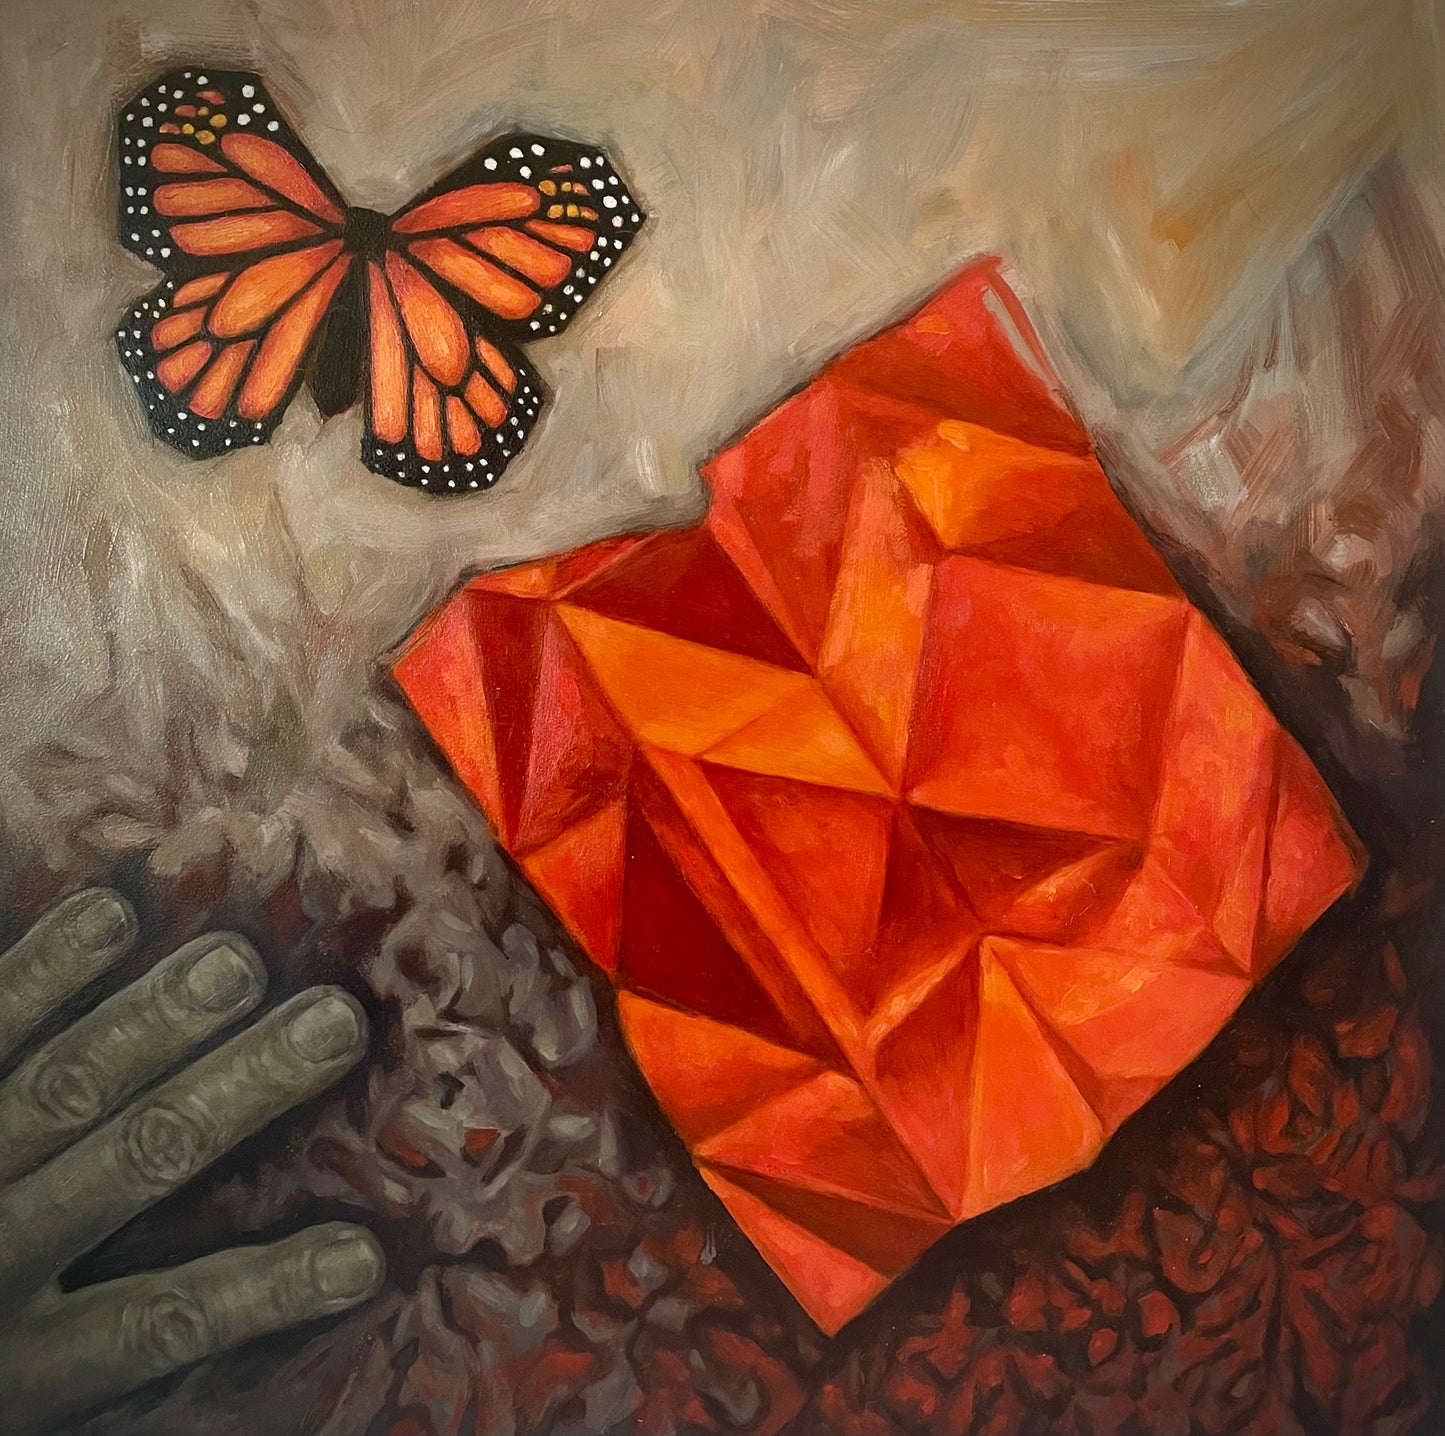 "Metamorphosis" by Kirstin Mitchell. Oil on panel. 12"x12". Framed.